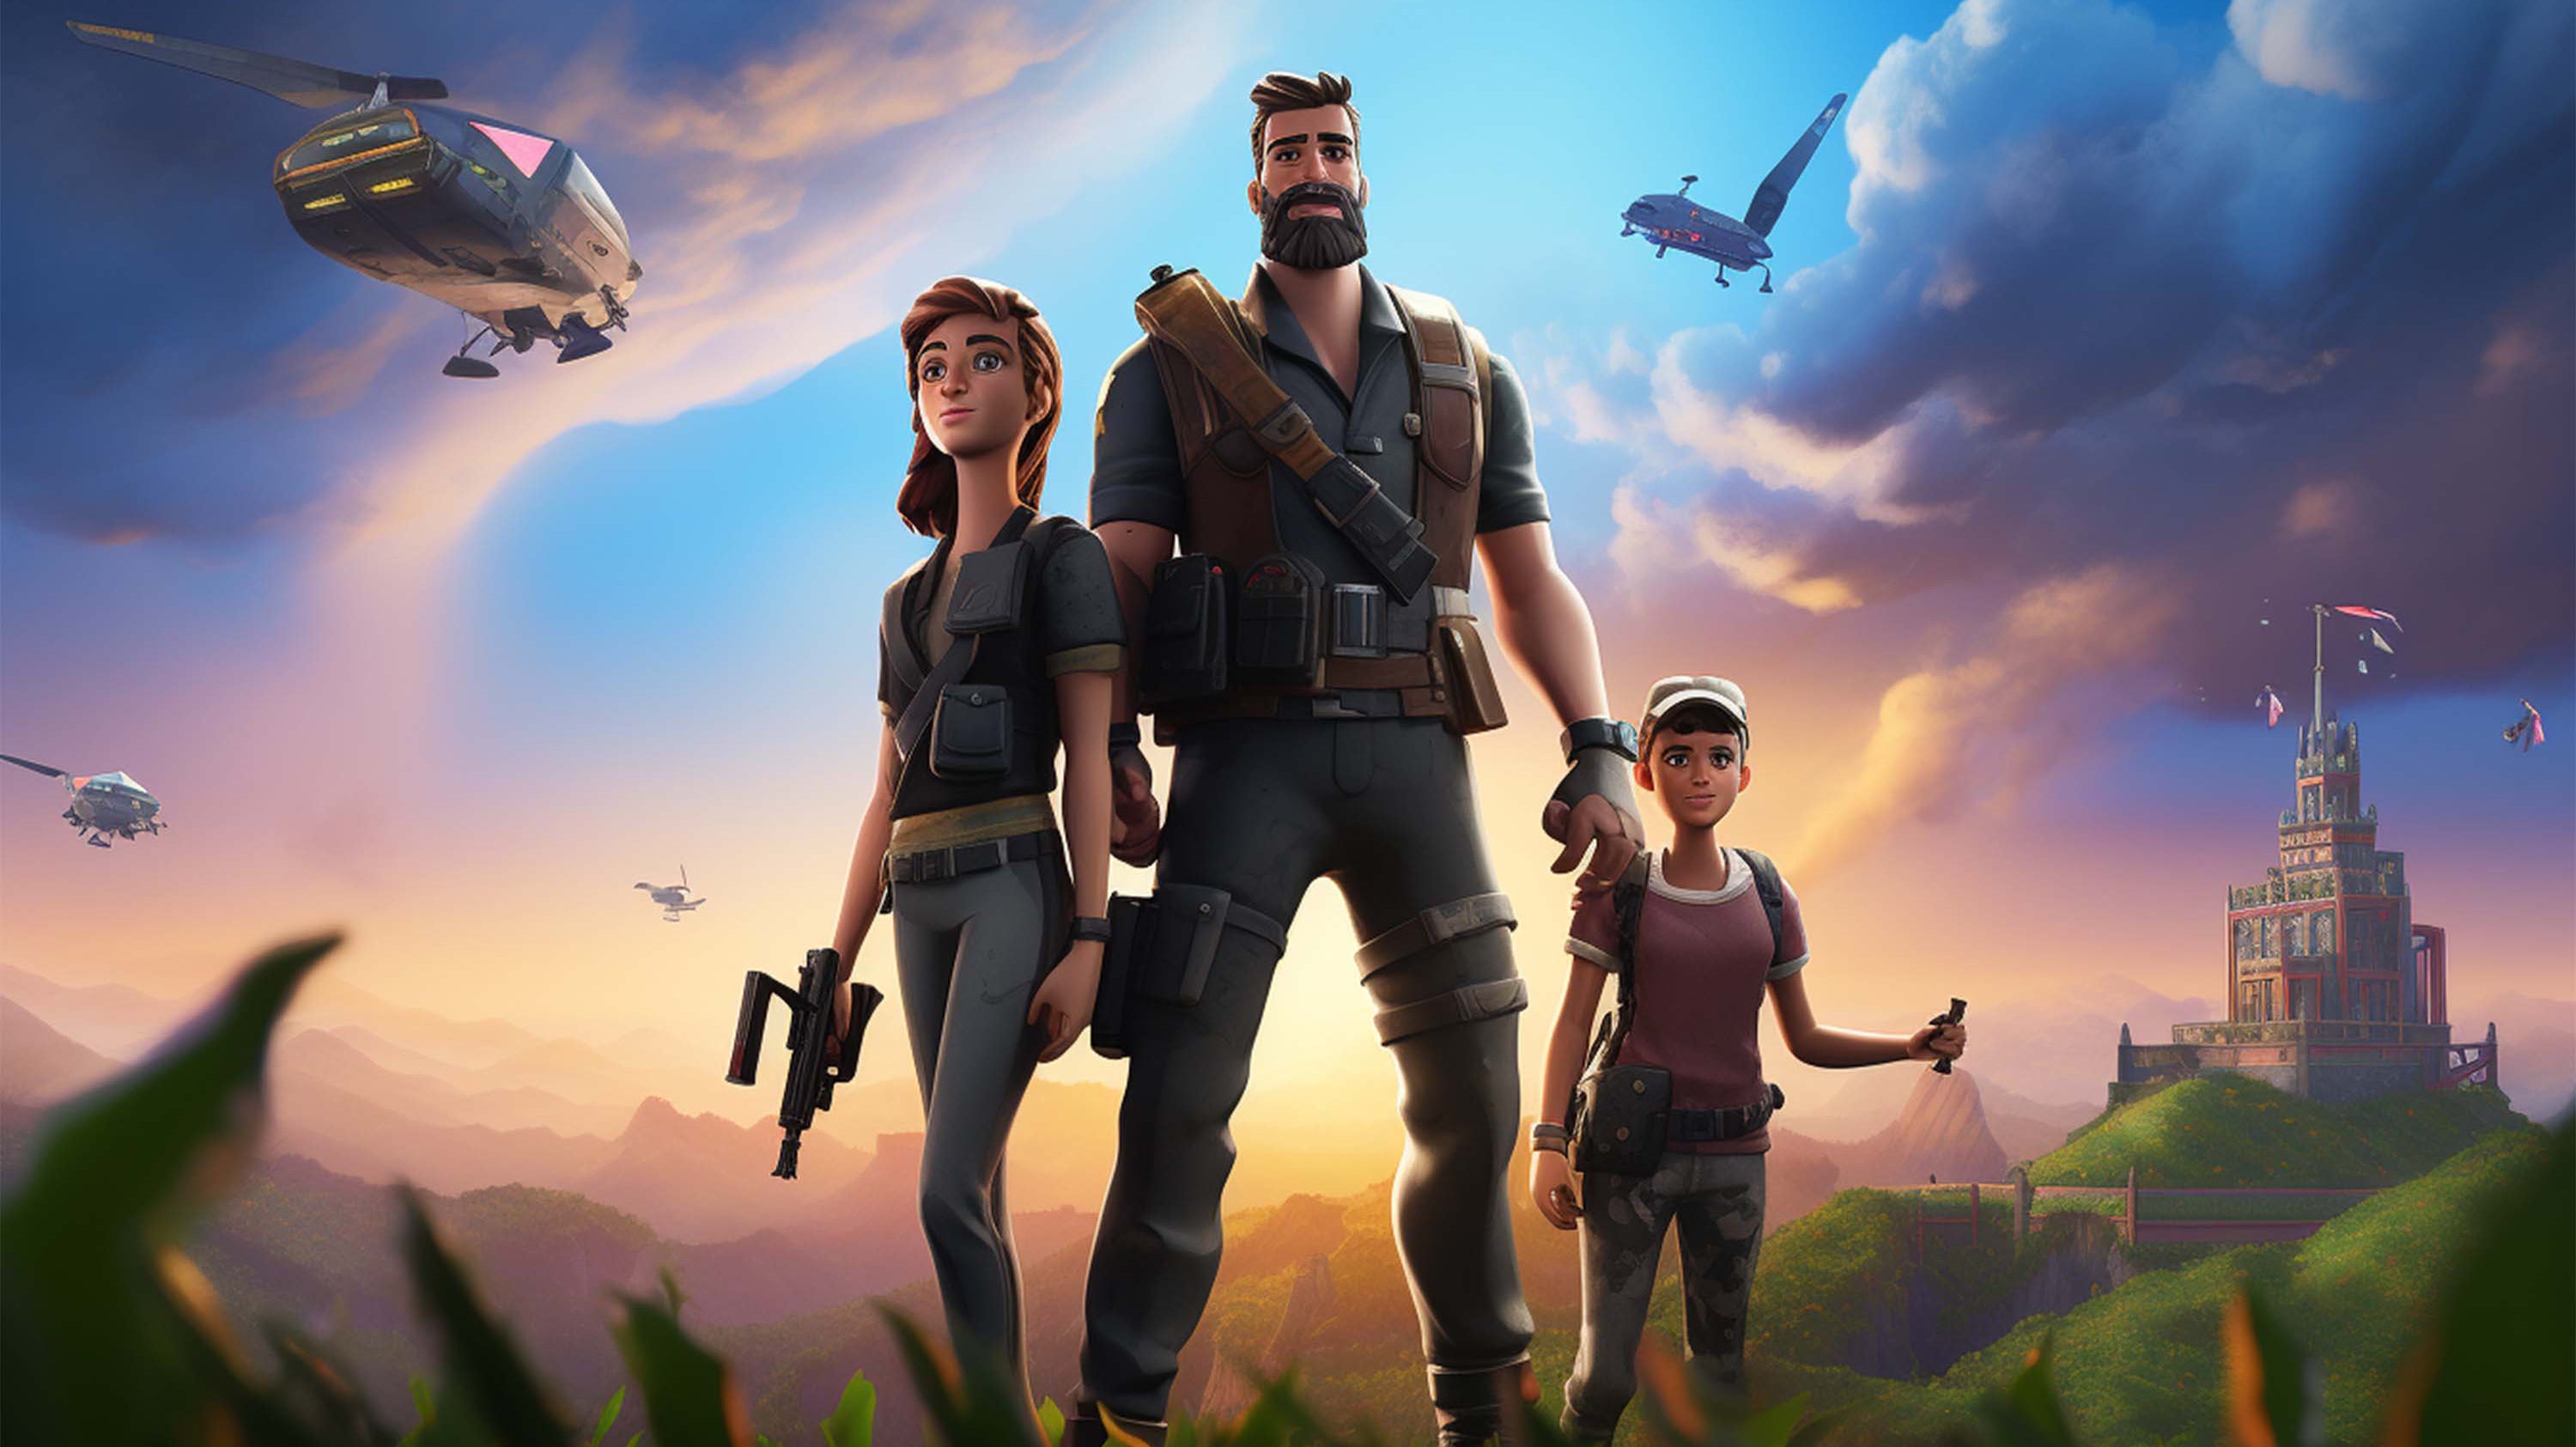 Battle Prep: The 7 Risks Parents Need to Know About Fortnite Battle Royale